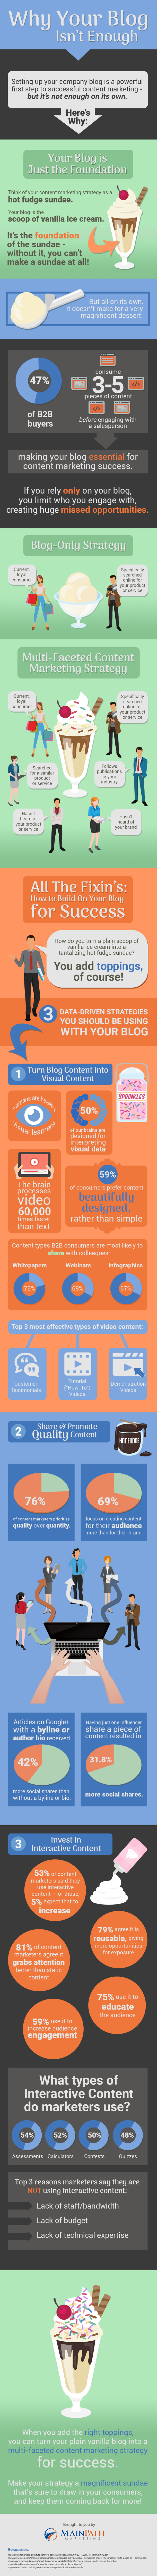 Why Your Blog Isn't Enough - #Infographic